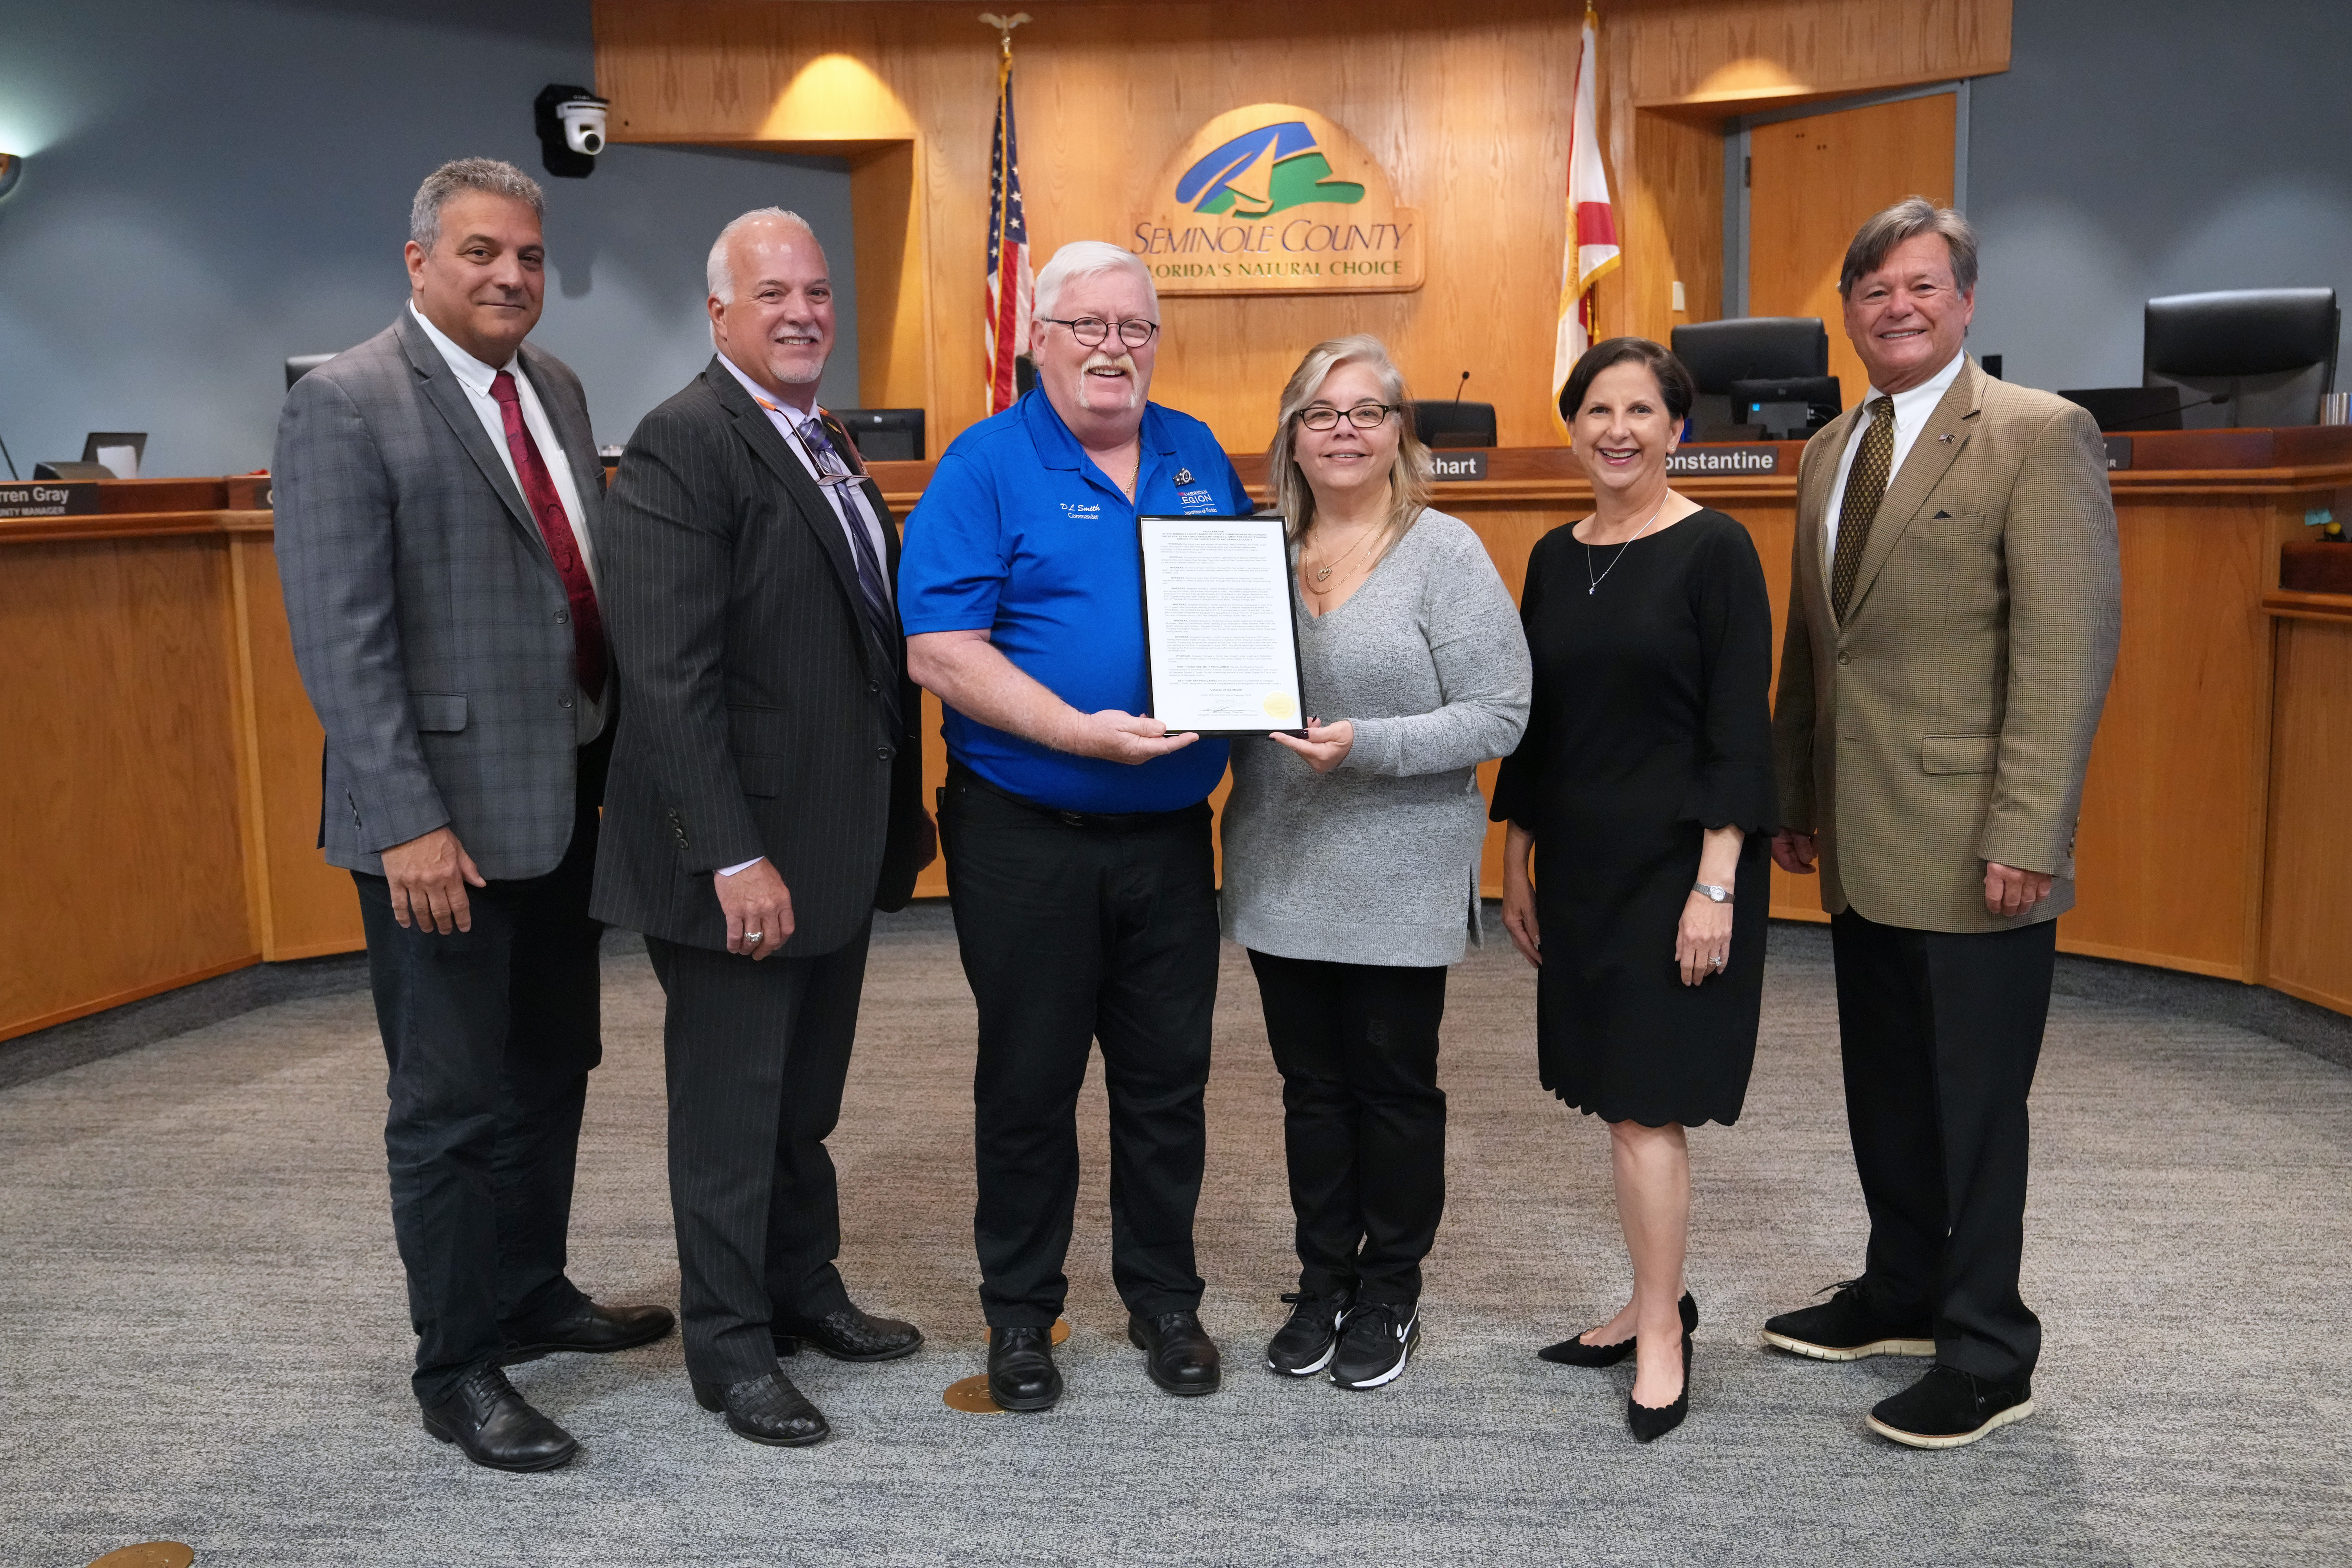 Proclamation - Proclaiming Sergeant Donald L. Smith, United States Air Force, as Seminole County's February Veteran of the Month 